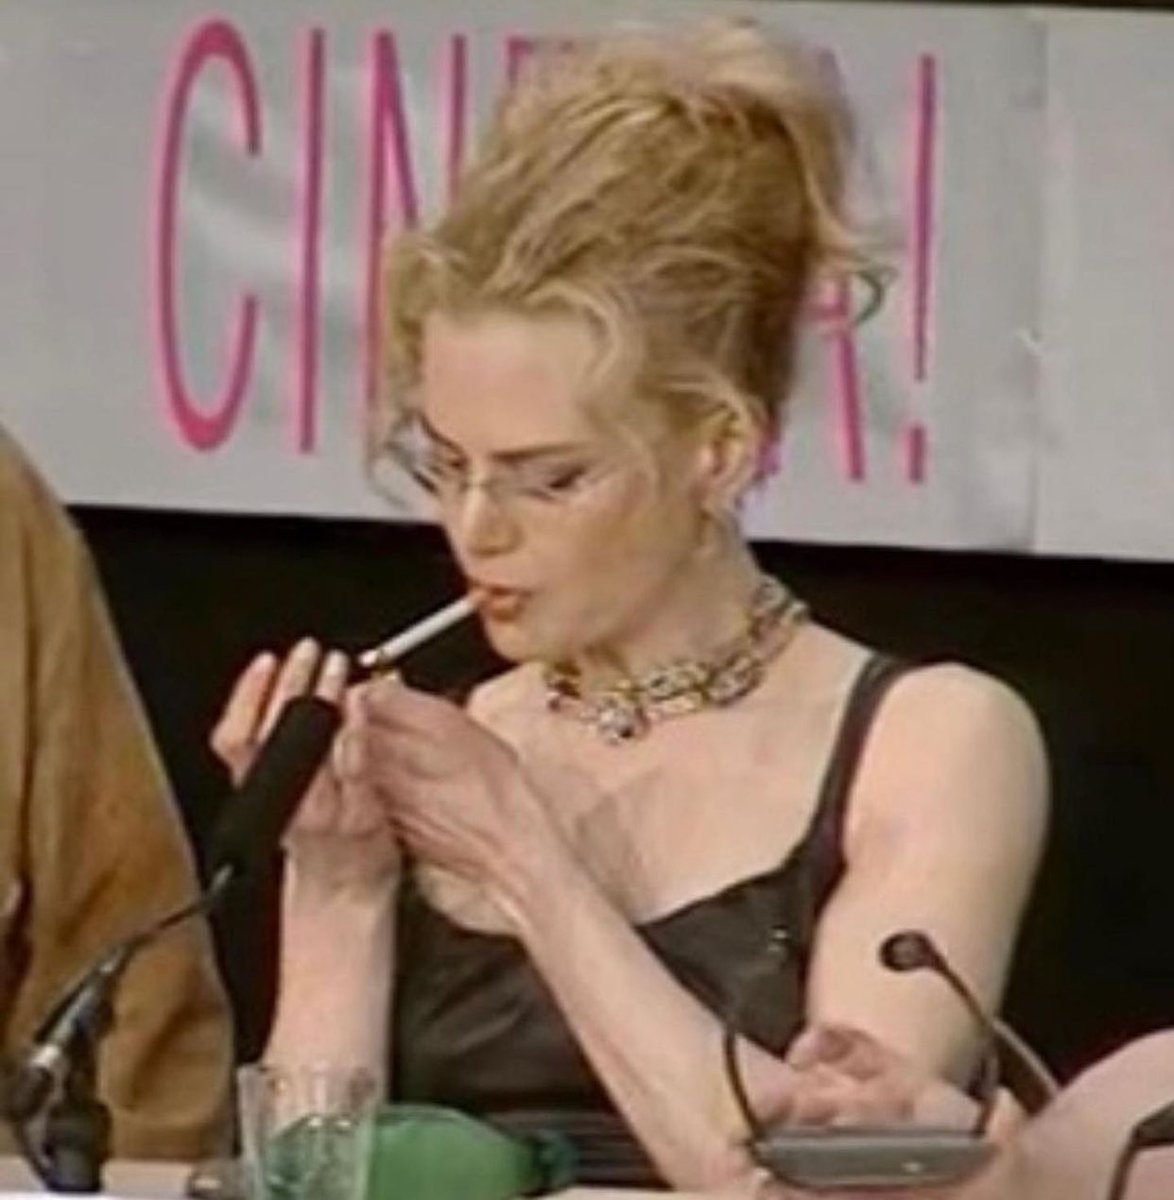 some of my favorite moments of the cannes film festival:

1) nicole kidman looking effortlessly cunty in 2003